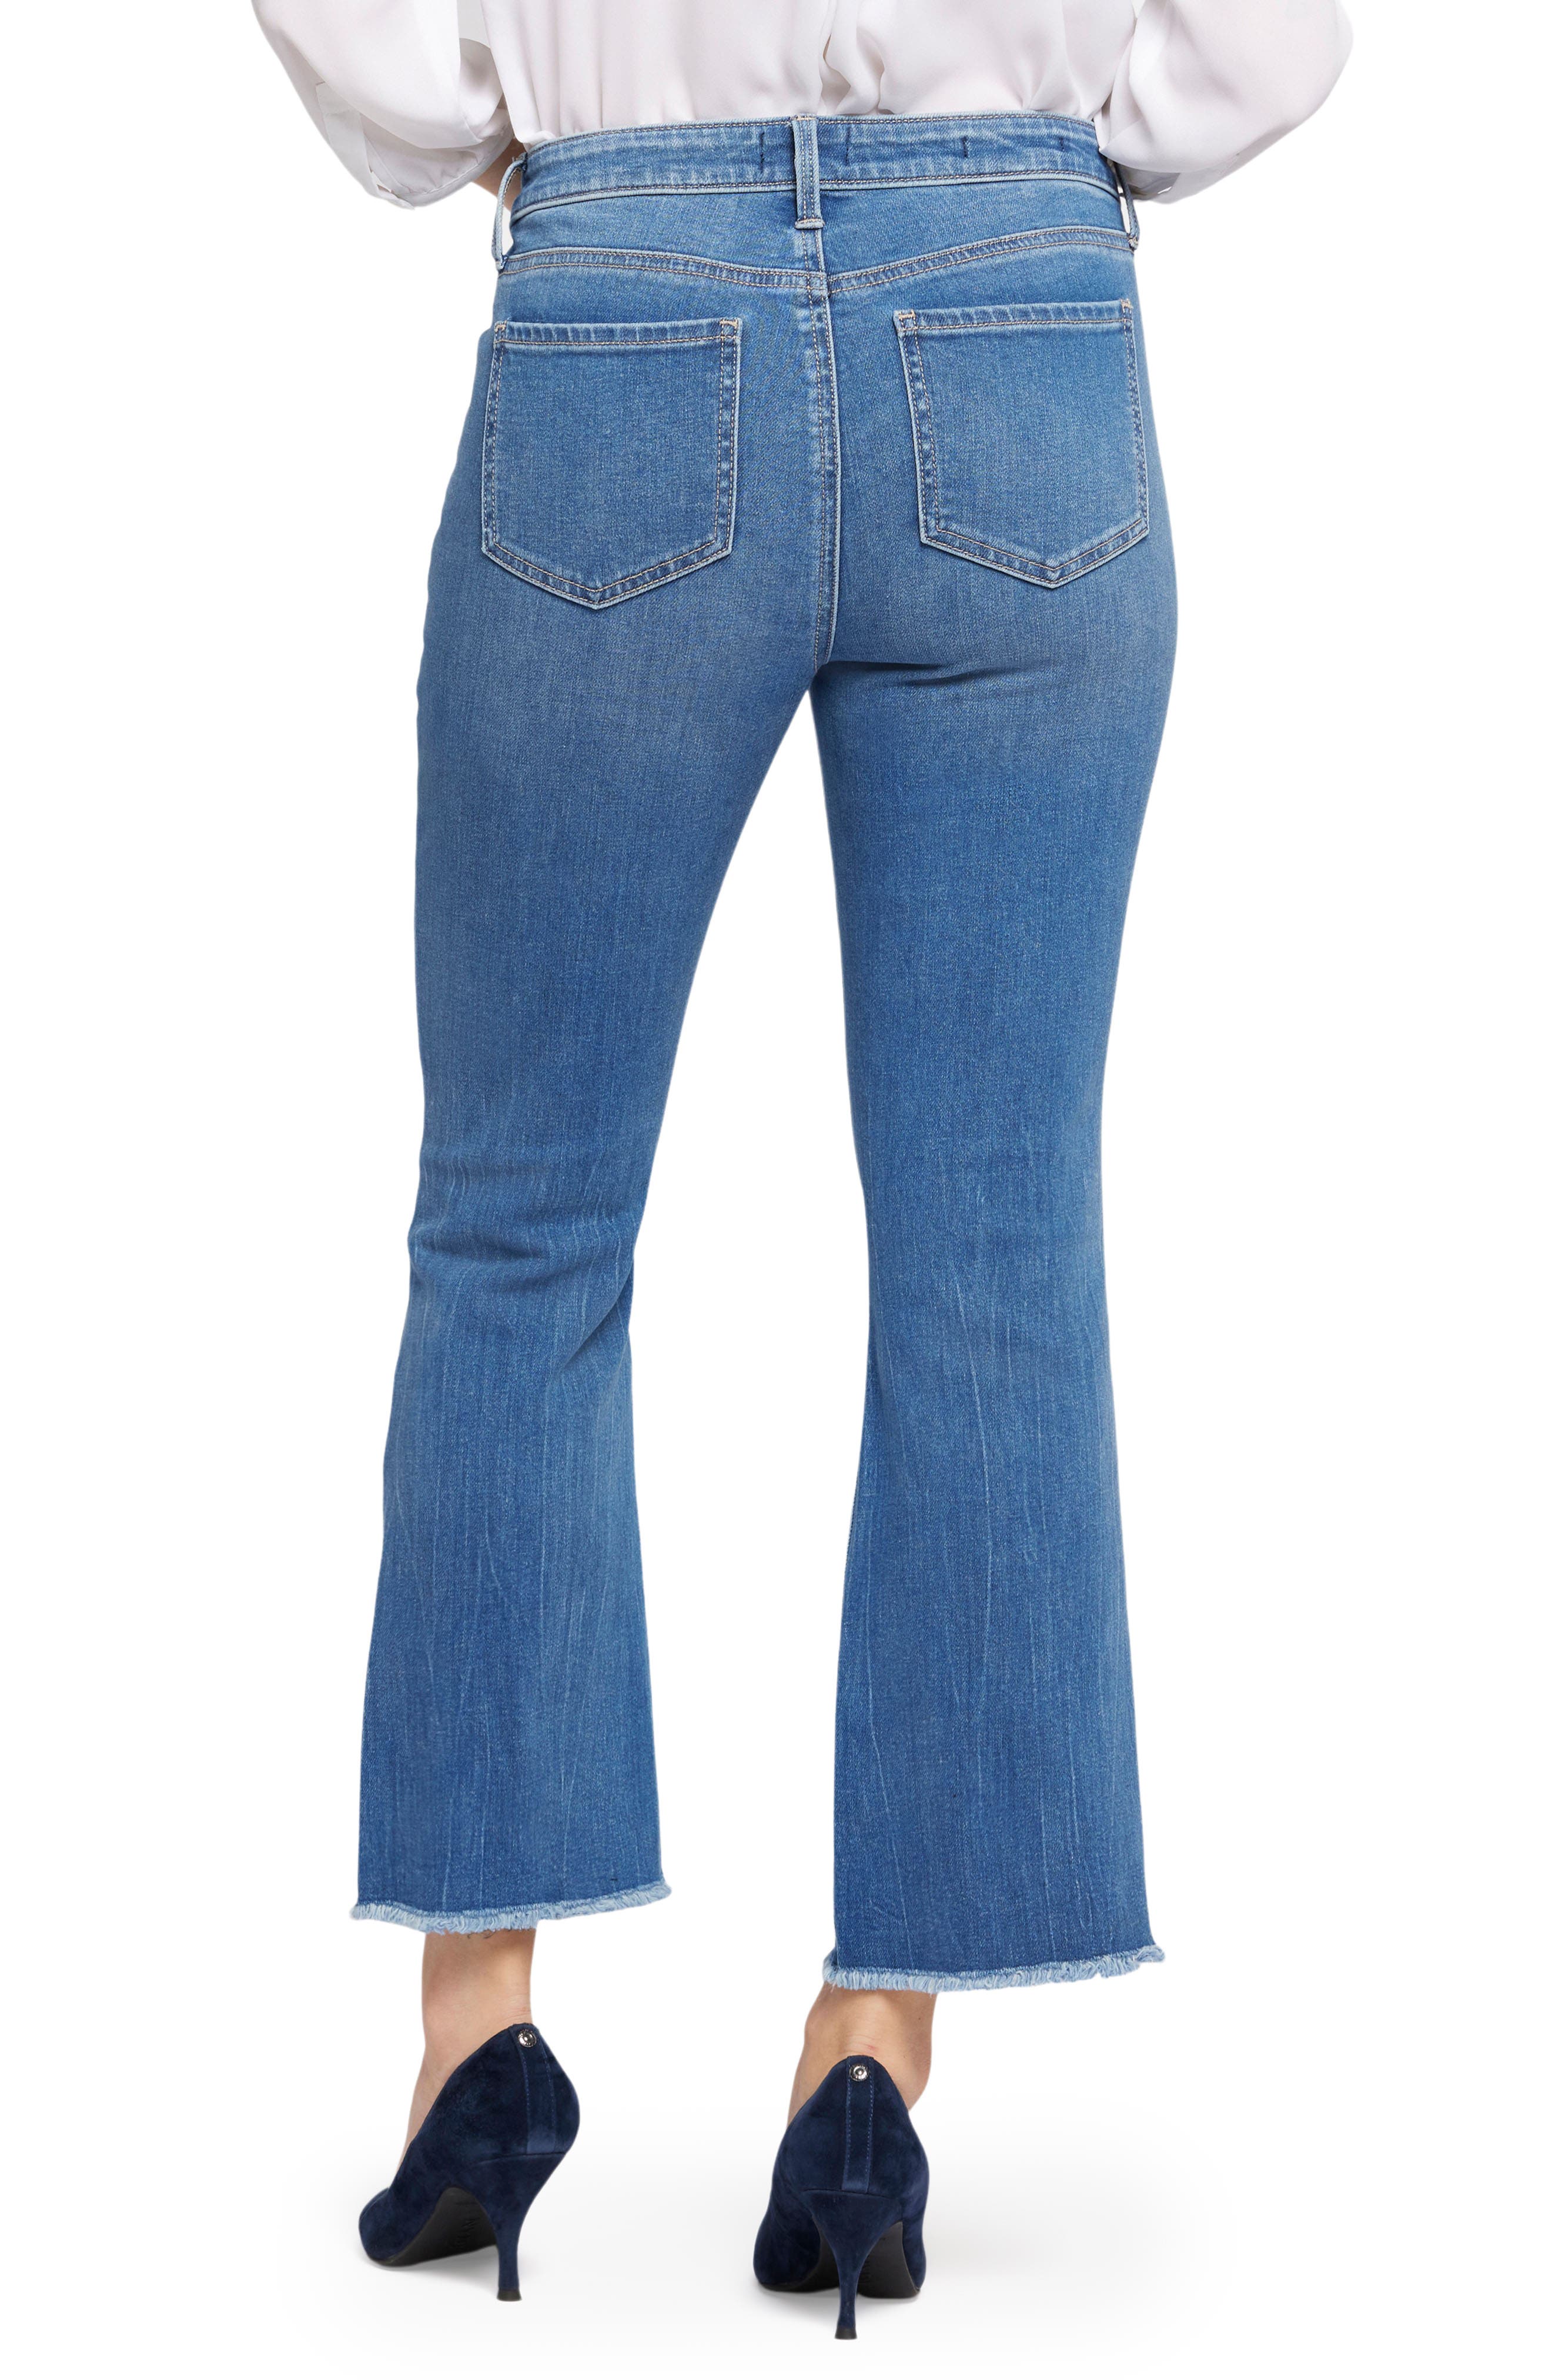 NYDJ Barbara Fray Hem Ankle Bootcut Jeans in Fairmont